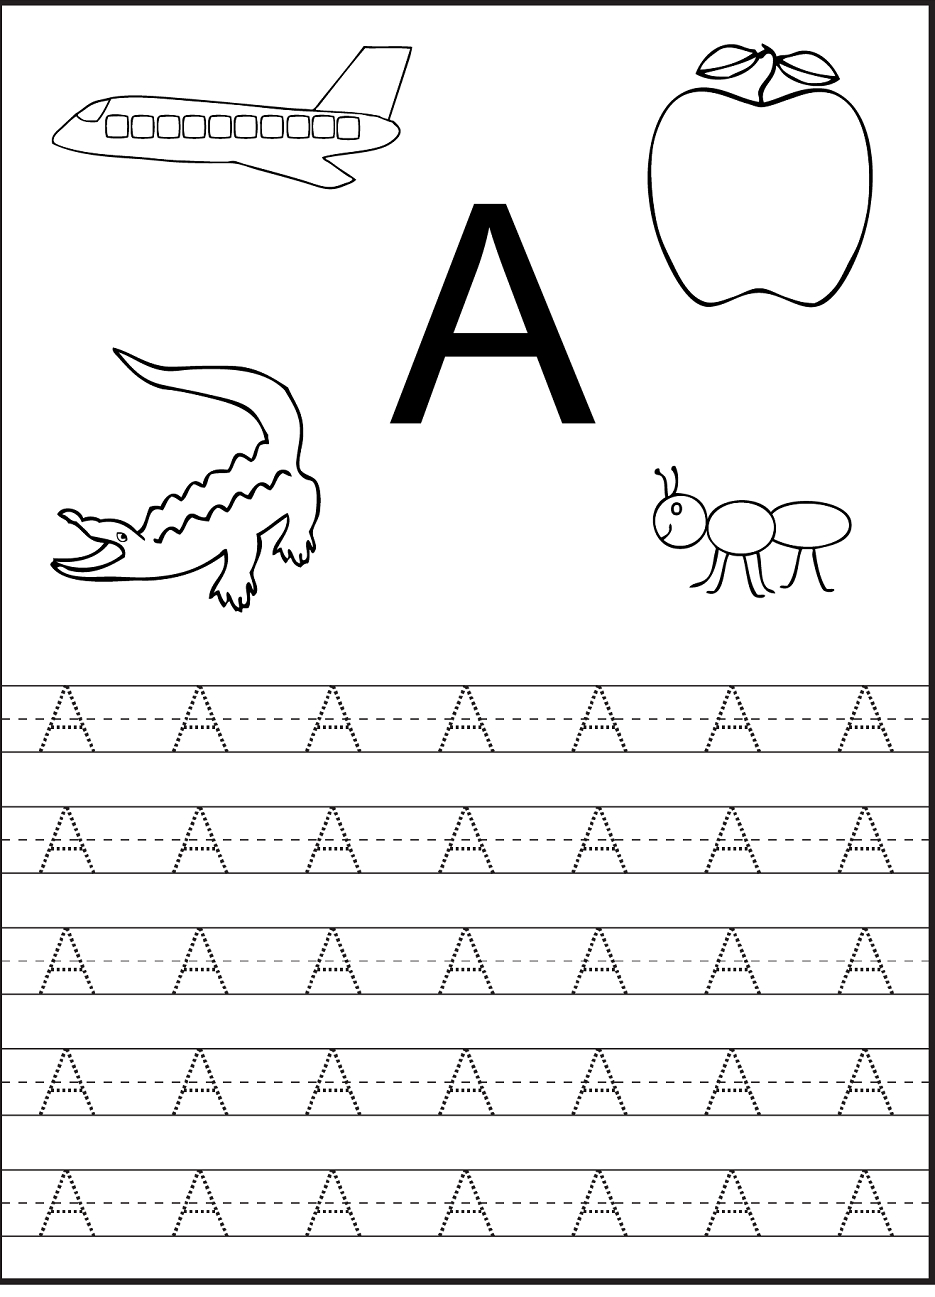 Tracing The Letter A Free Printable | Preschool Worksheets throughout Printable Tracing Letters Free